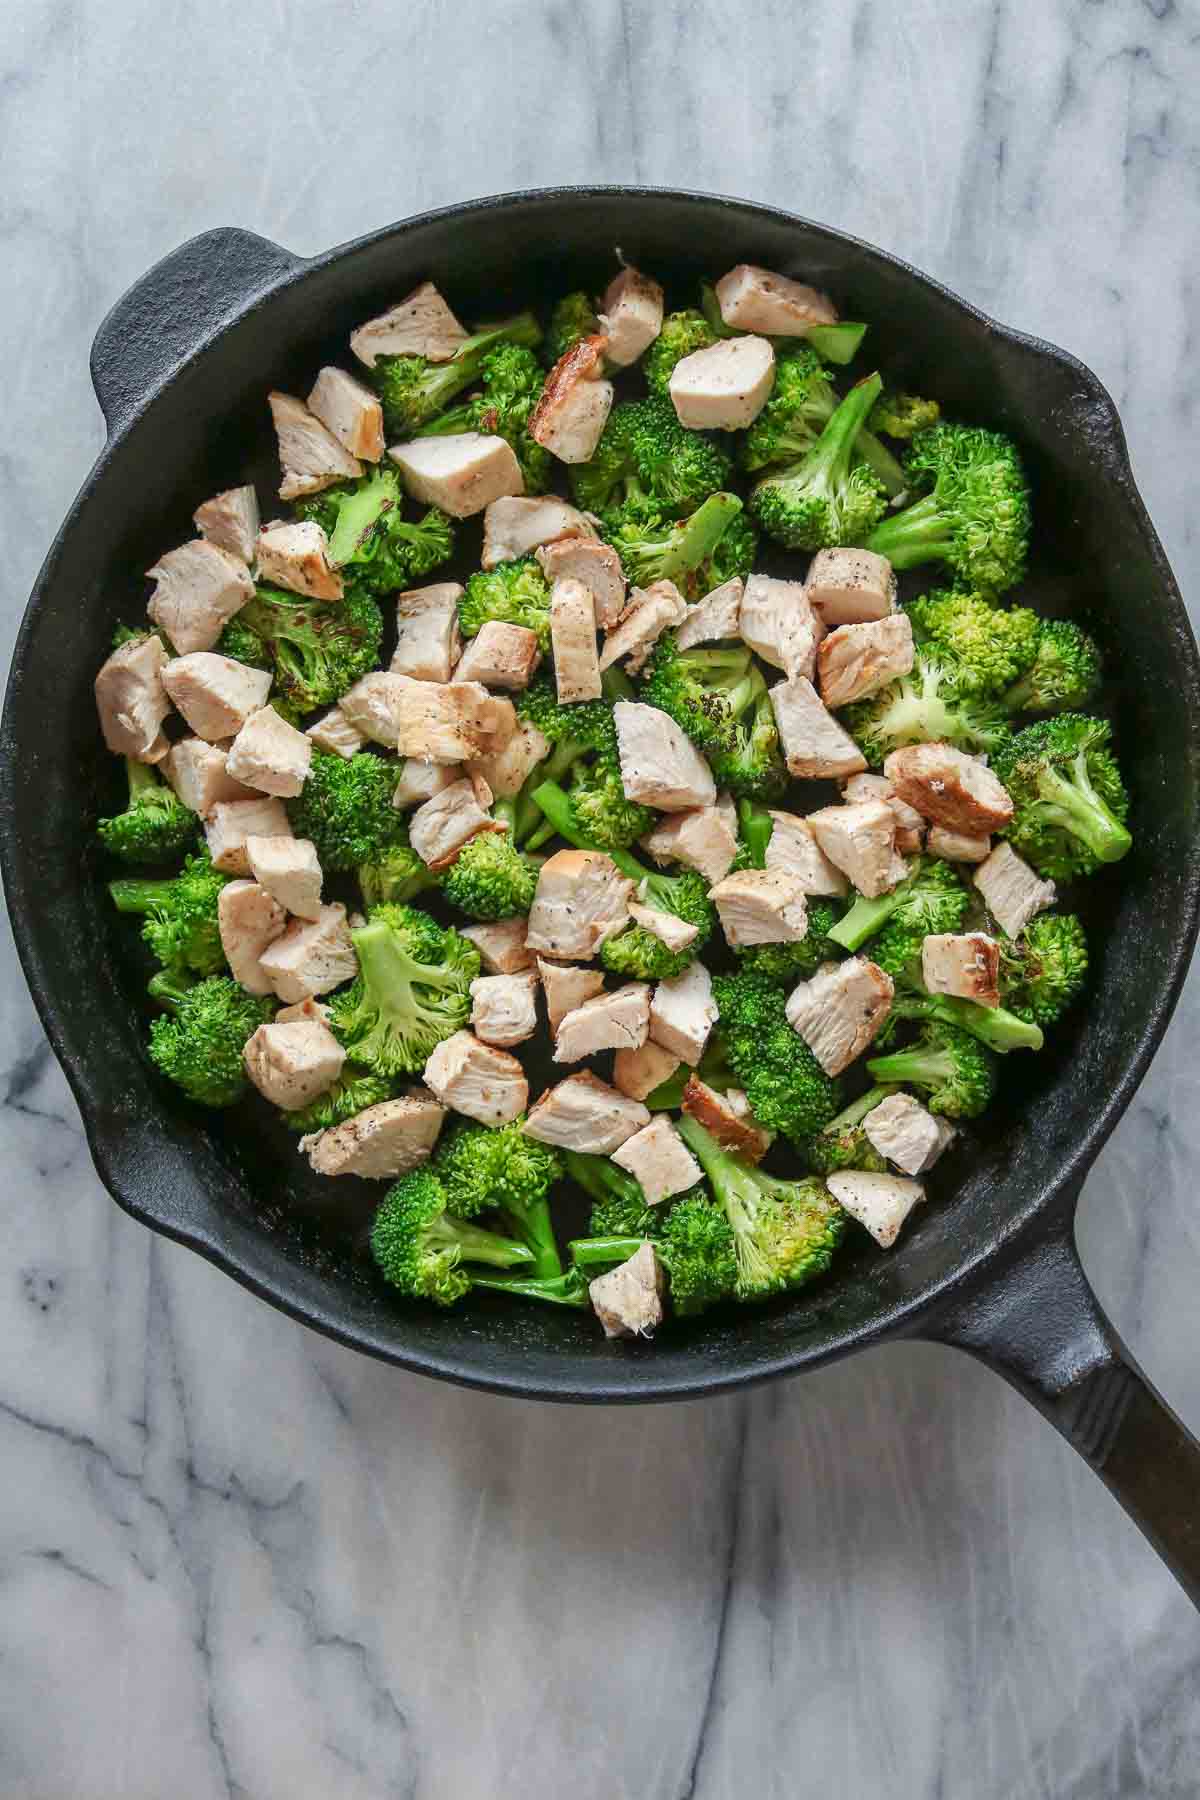 Cubes of cooked chicken and broccoli florets in a skillet.